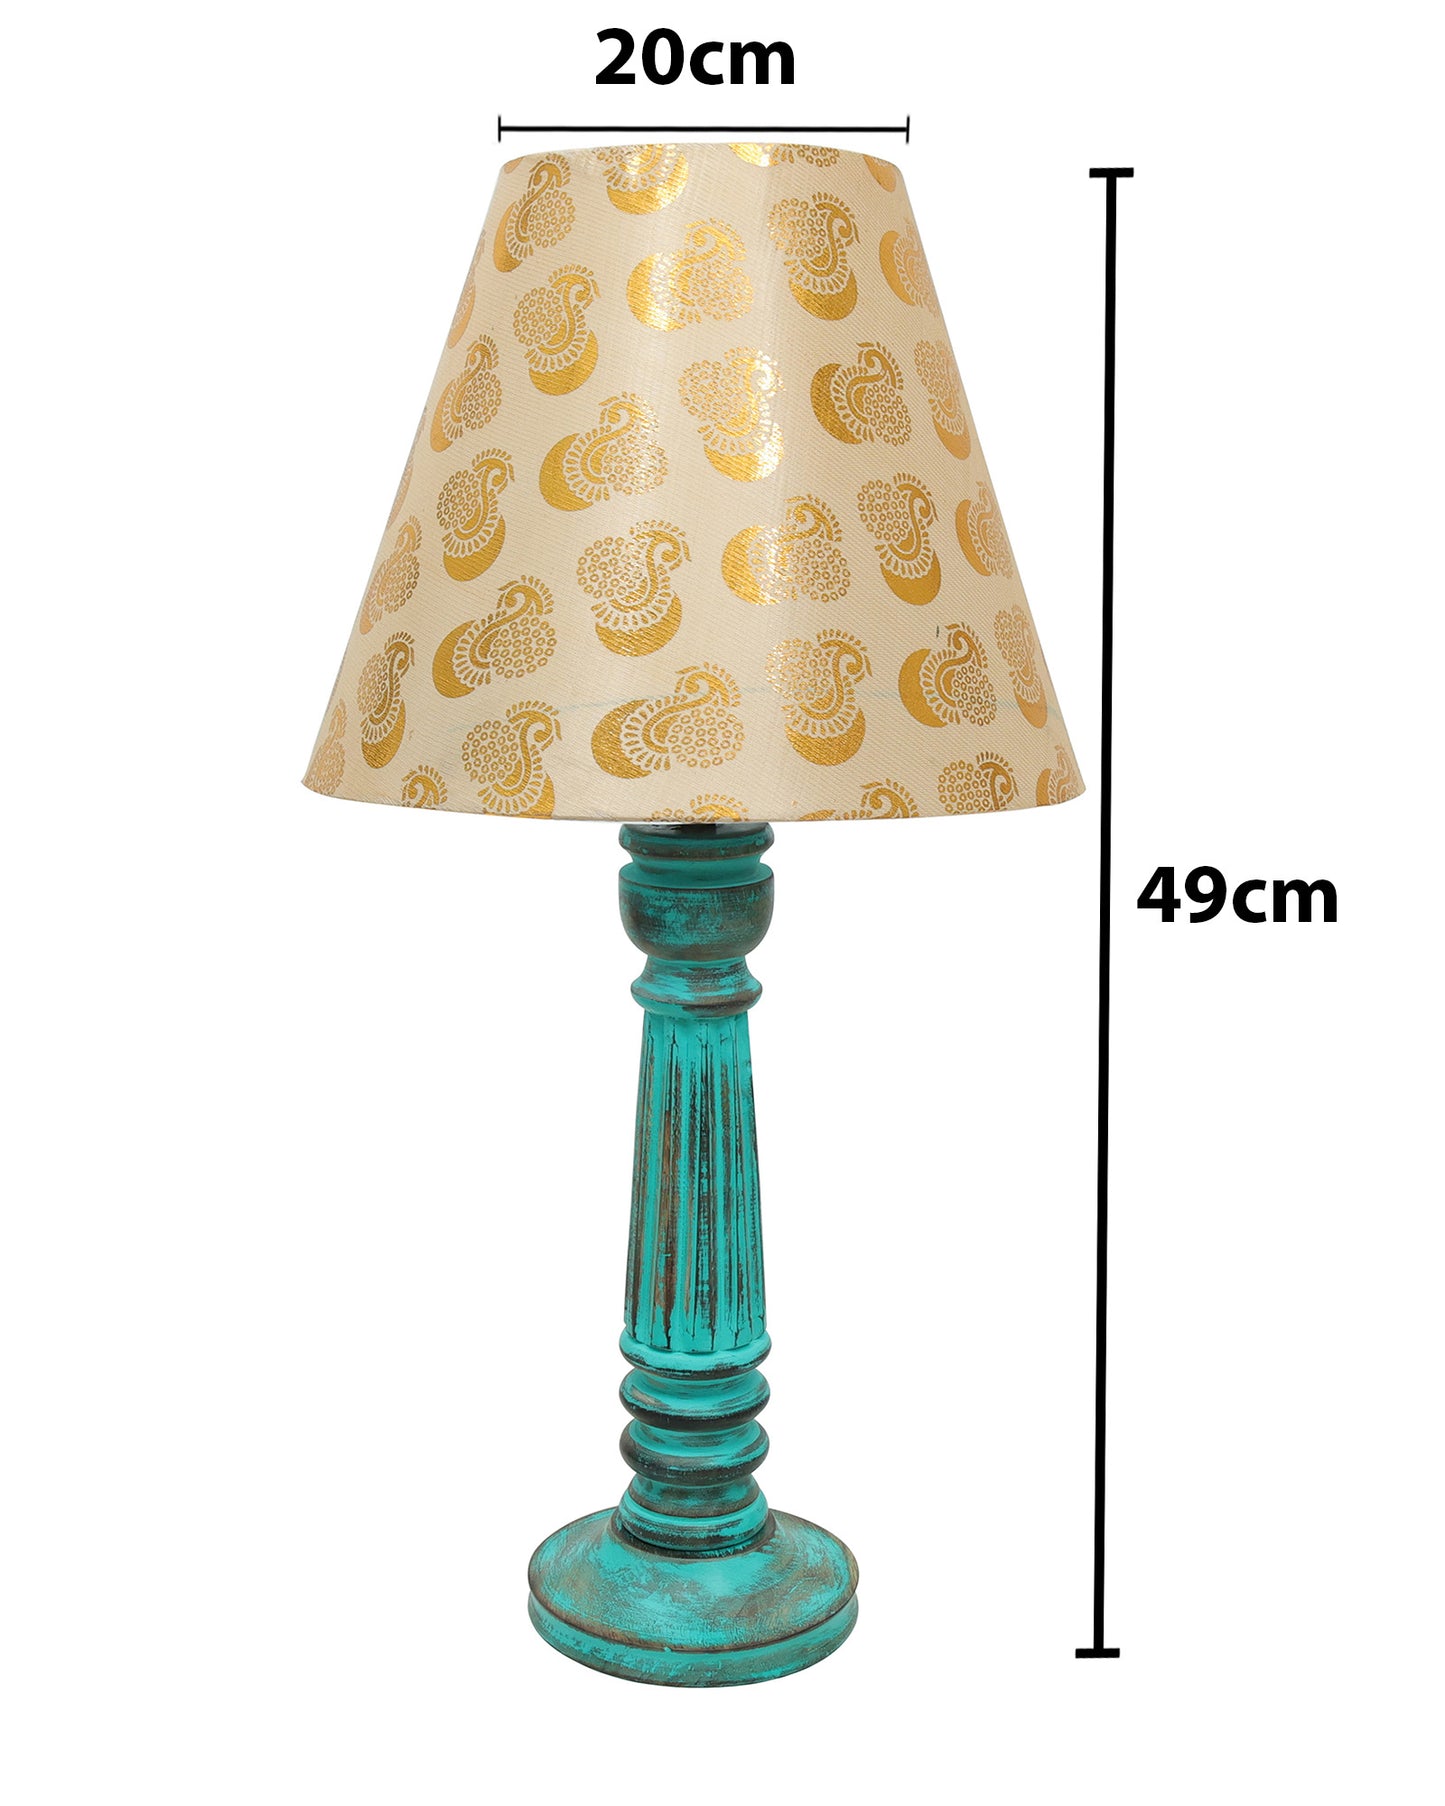 Traditional Country Cottage Table Lamp Antique Algae Athens Desk Lamp for Bedroom Living Room